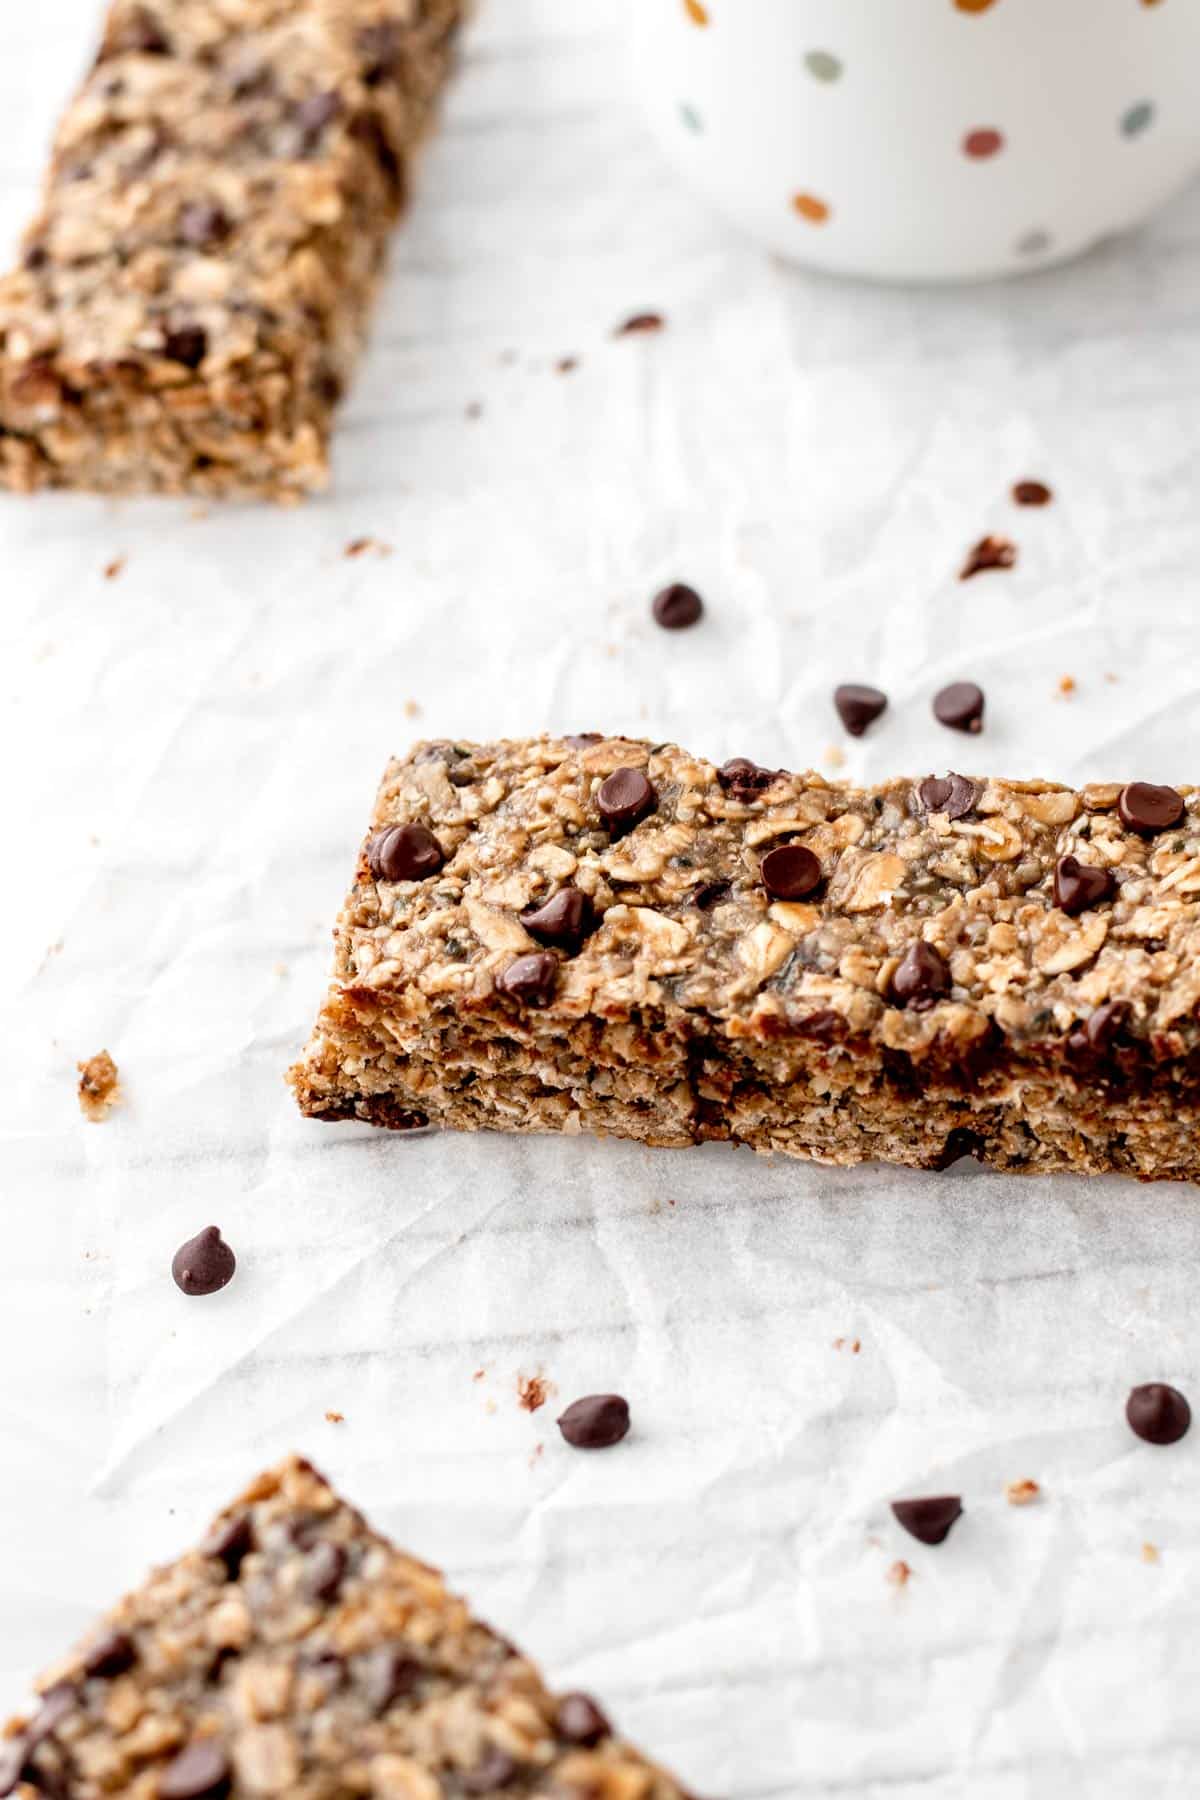 A peanut free granola bar cooling on a cooling rack.